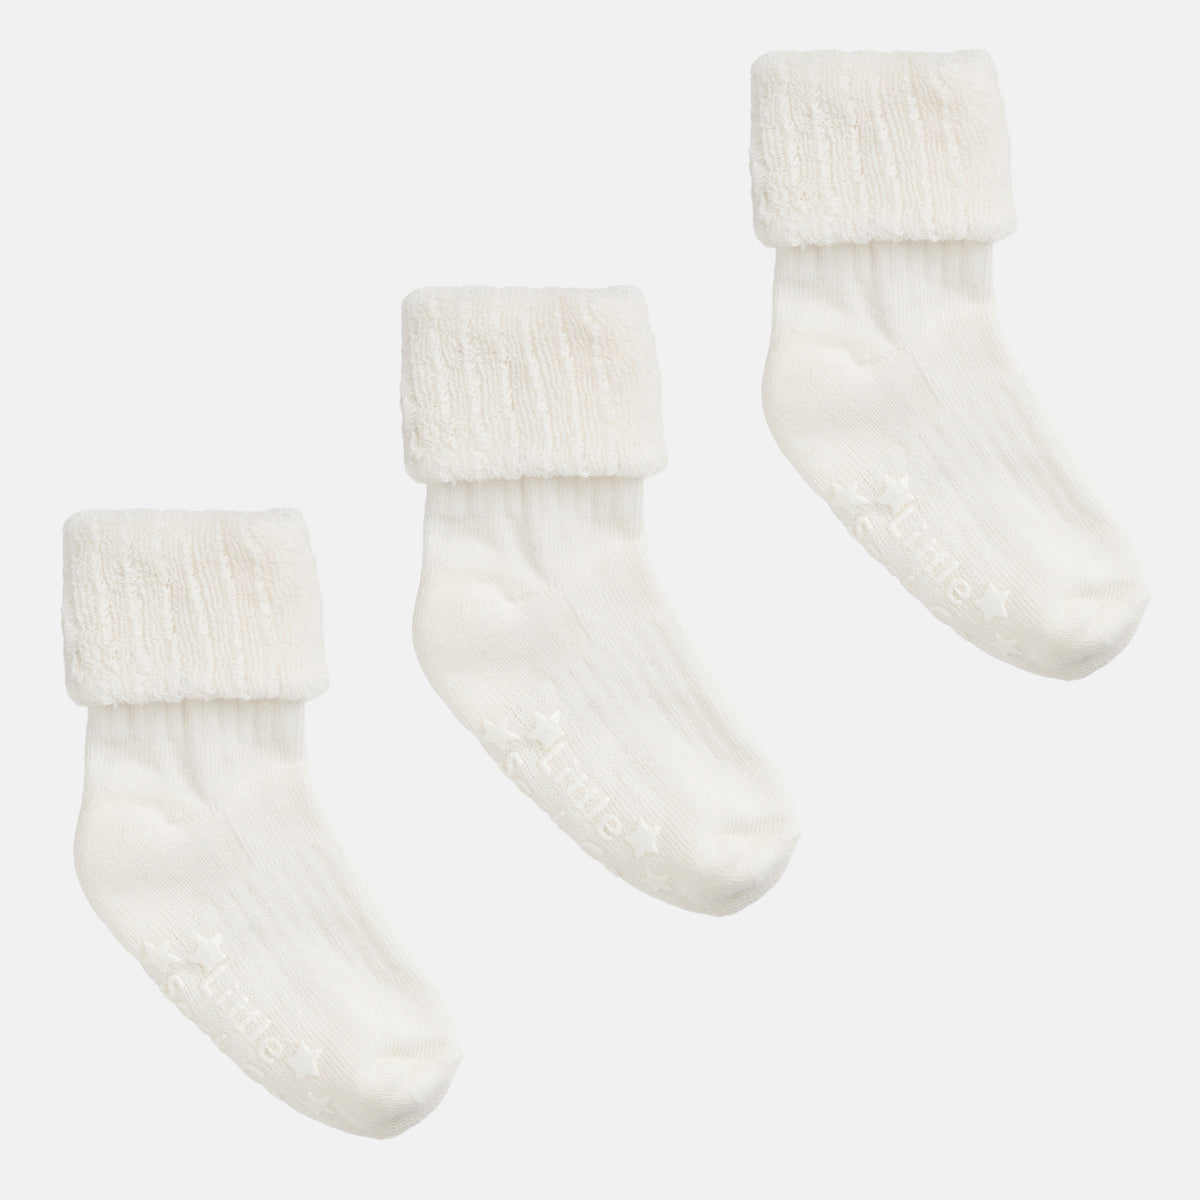 Cosy Stay on Winter Warm Non Slip Baby Socks - 3 Pack in Marshmallow - 0-2 years